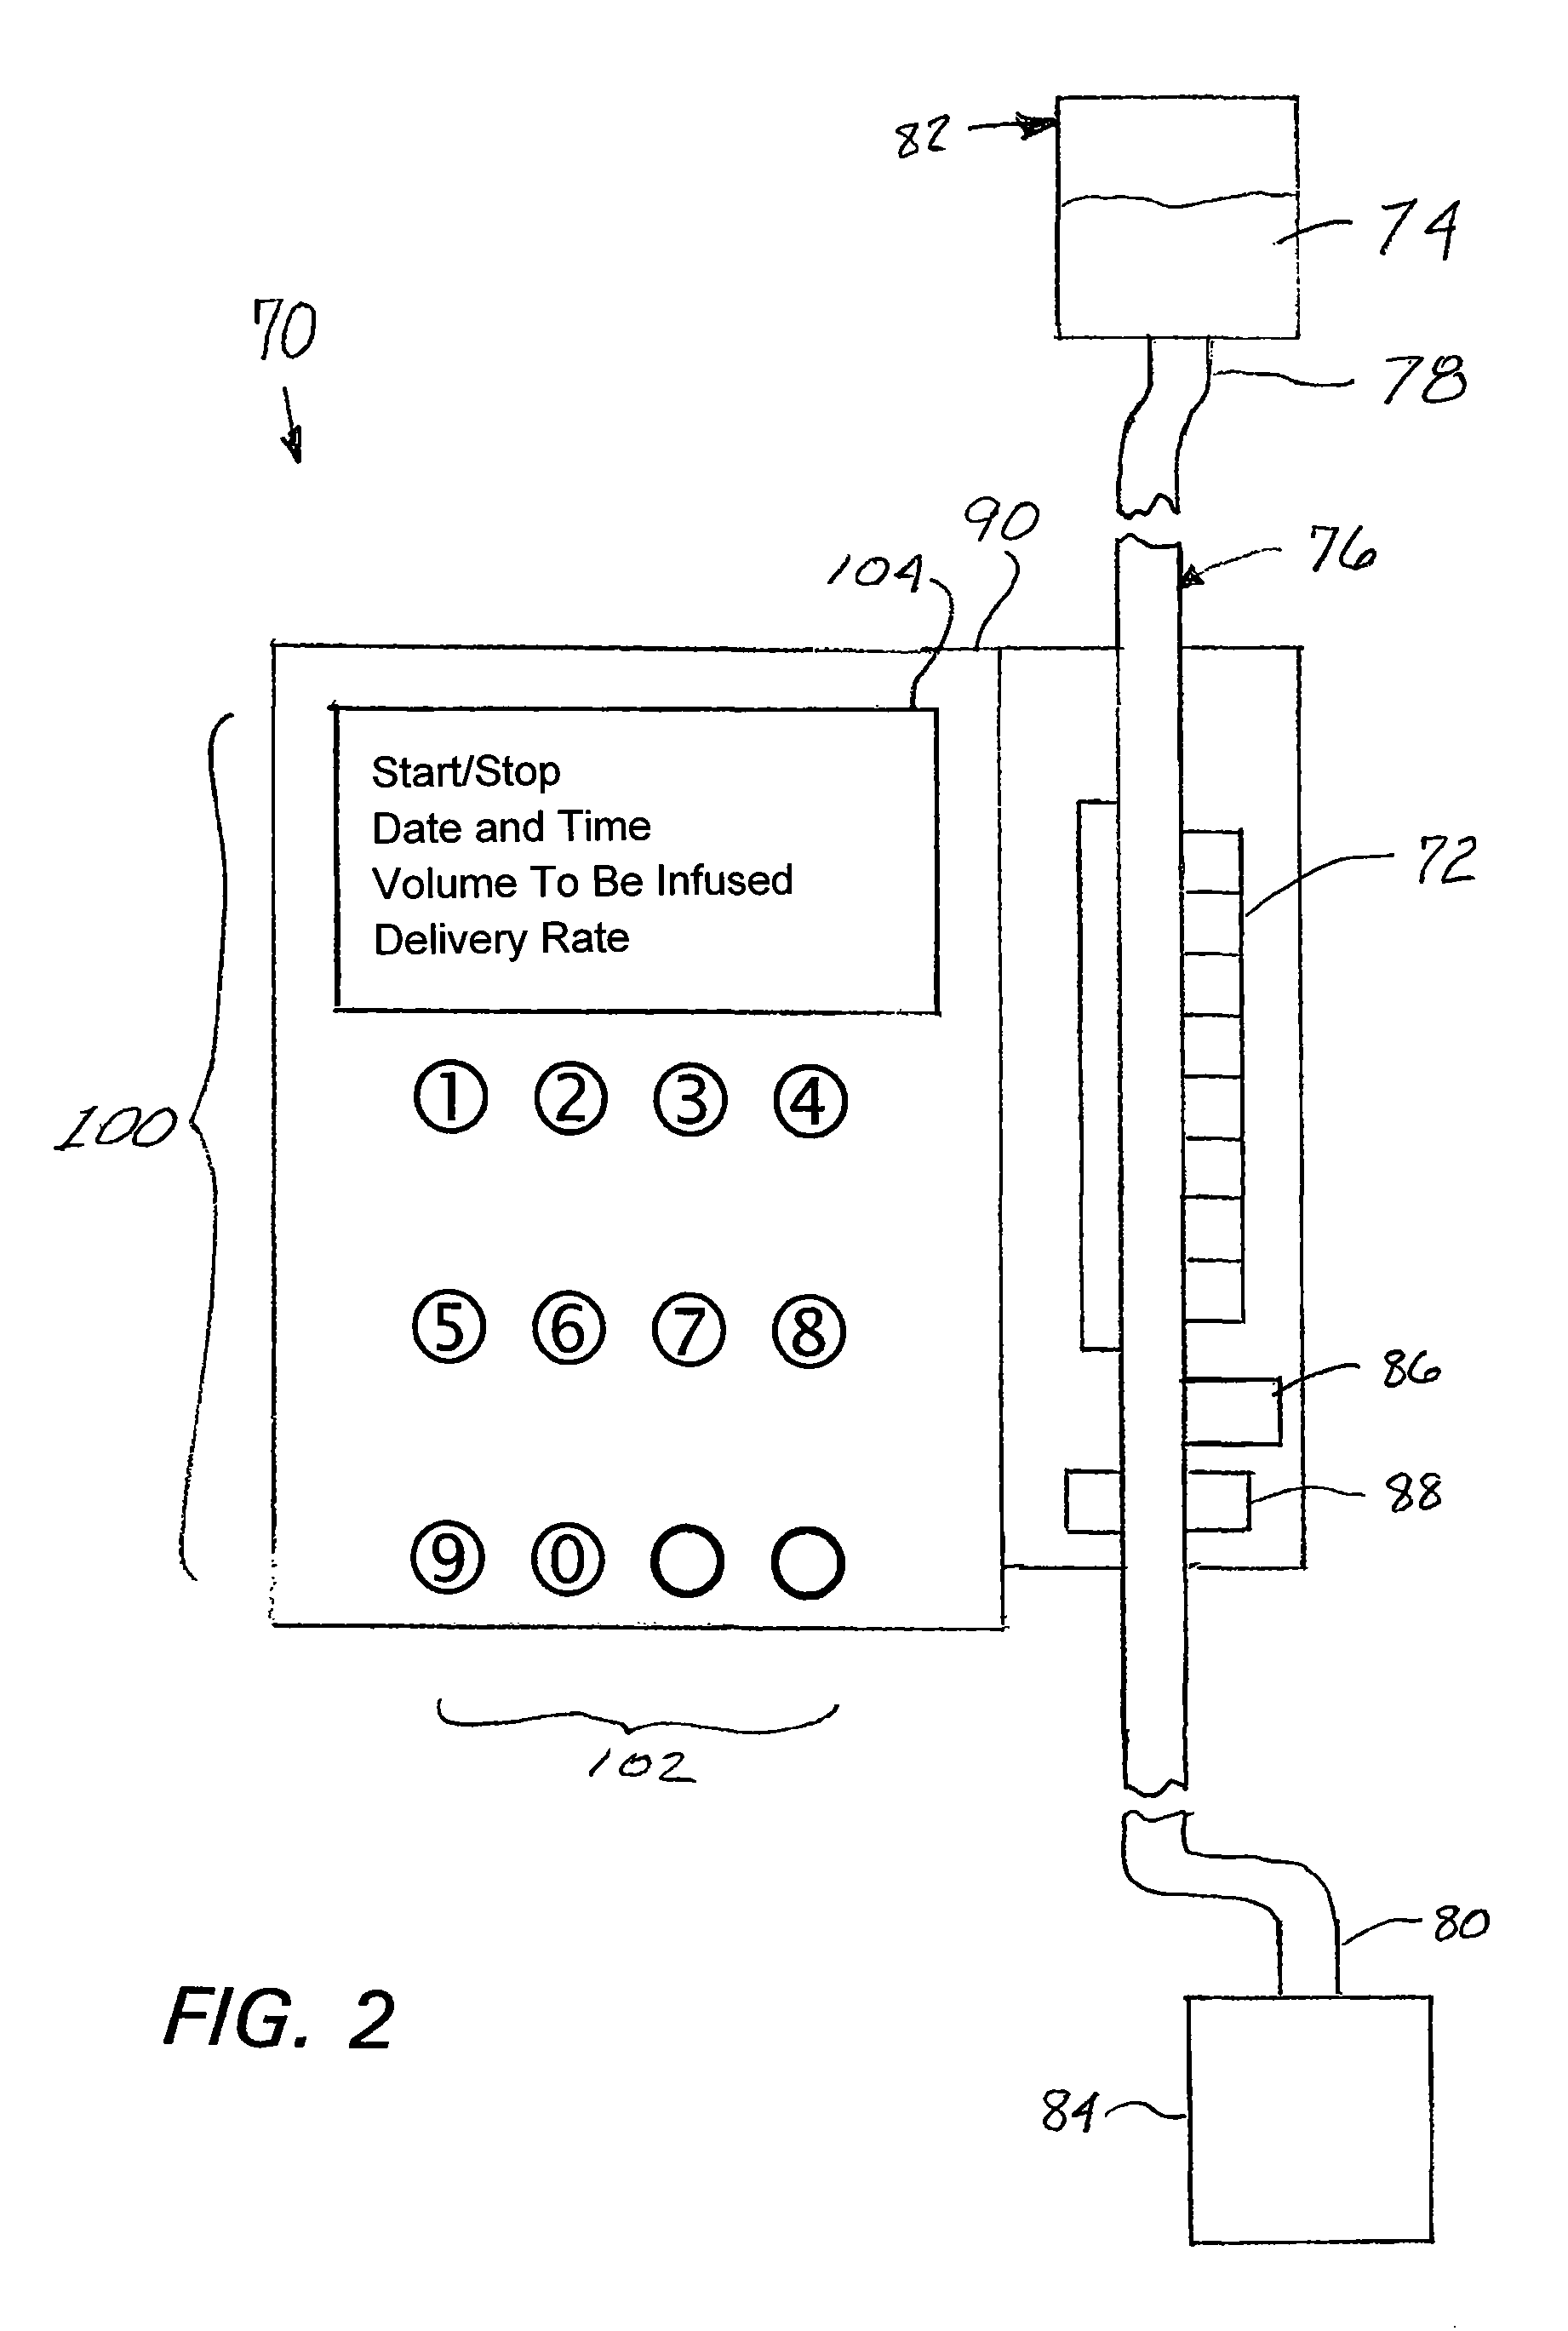 Distributed medication delivery system and method having autonomous delivery devices